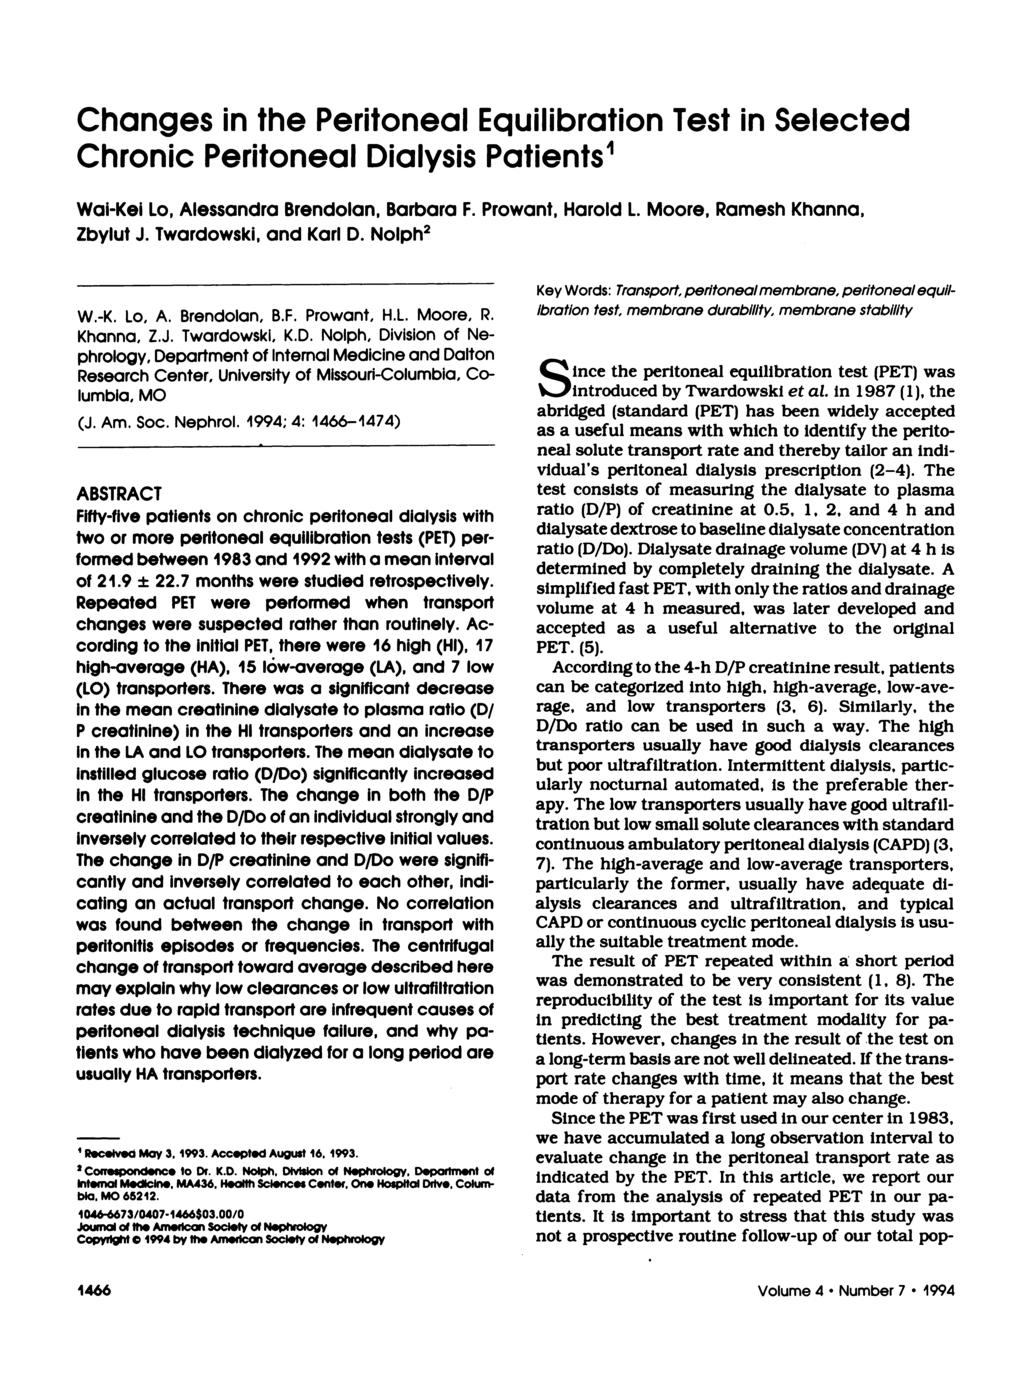 hanges in the Peritoneal Equilibration Test in Selected hronic Peritoneal Dialysis Patients1 Wai-Kei Lo, Alessandra Brendolan, Barbara F. Prowant, Harold L. Moore, Ramesh Khanna, Zbylut J.